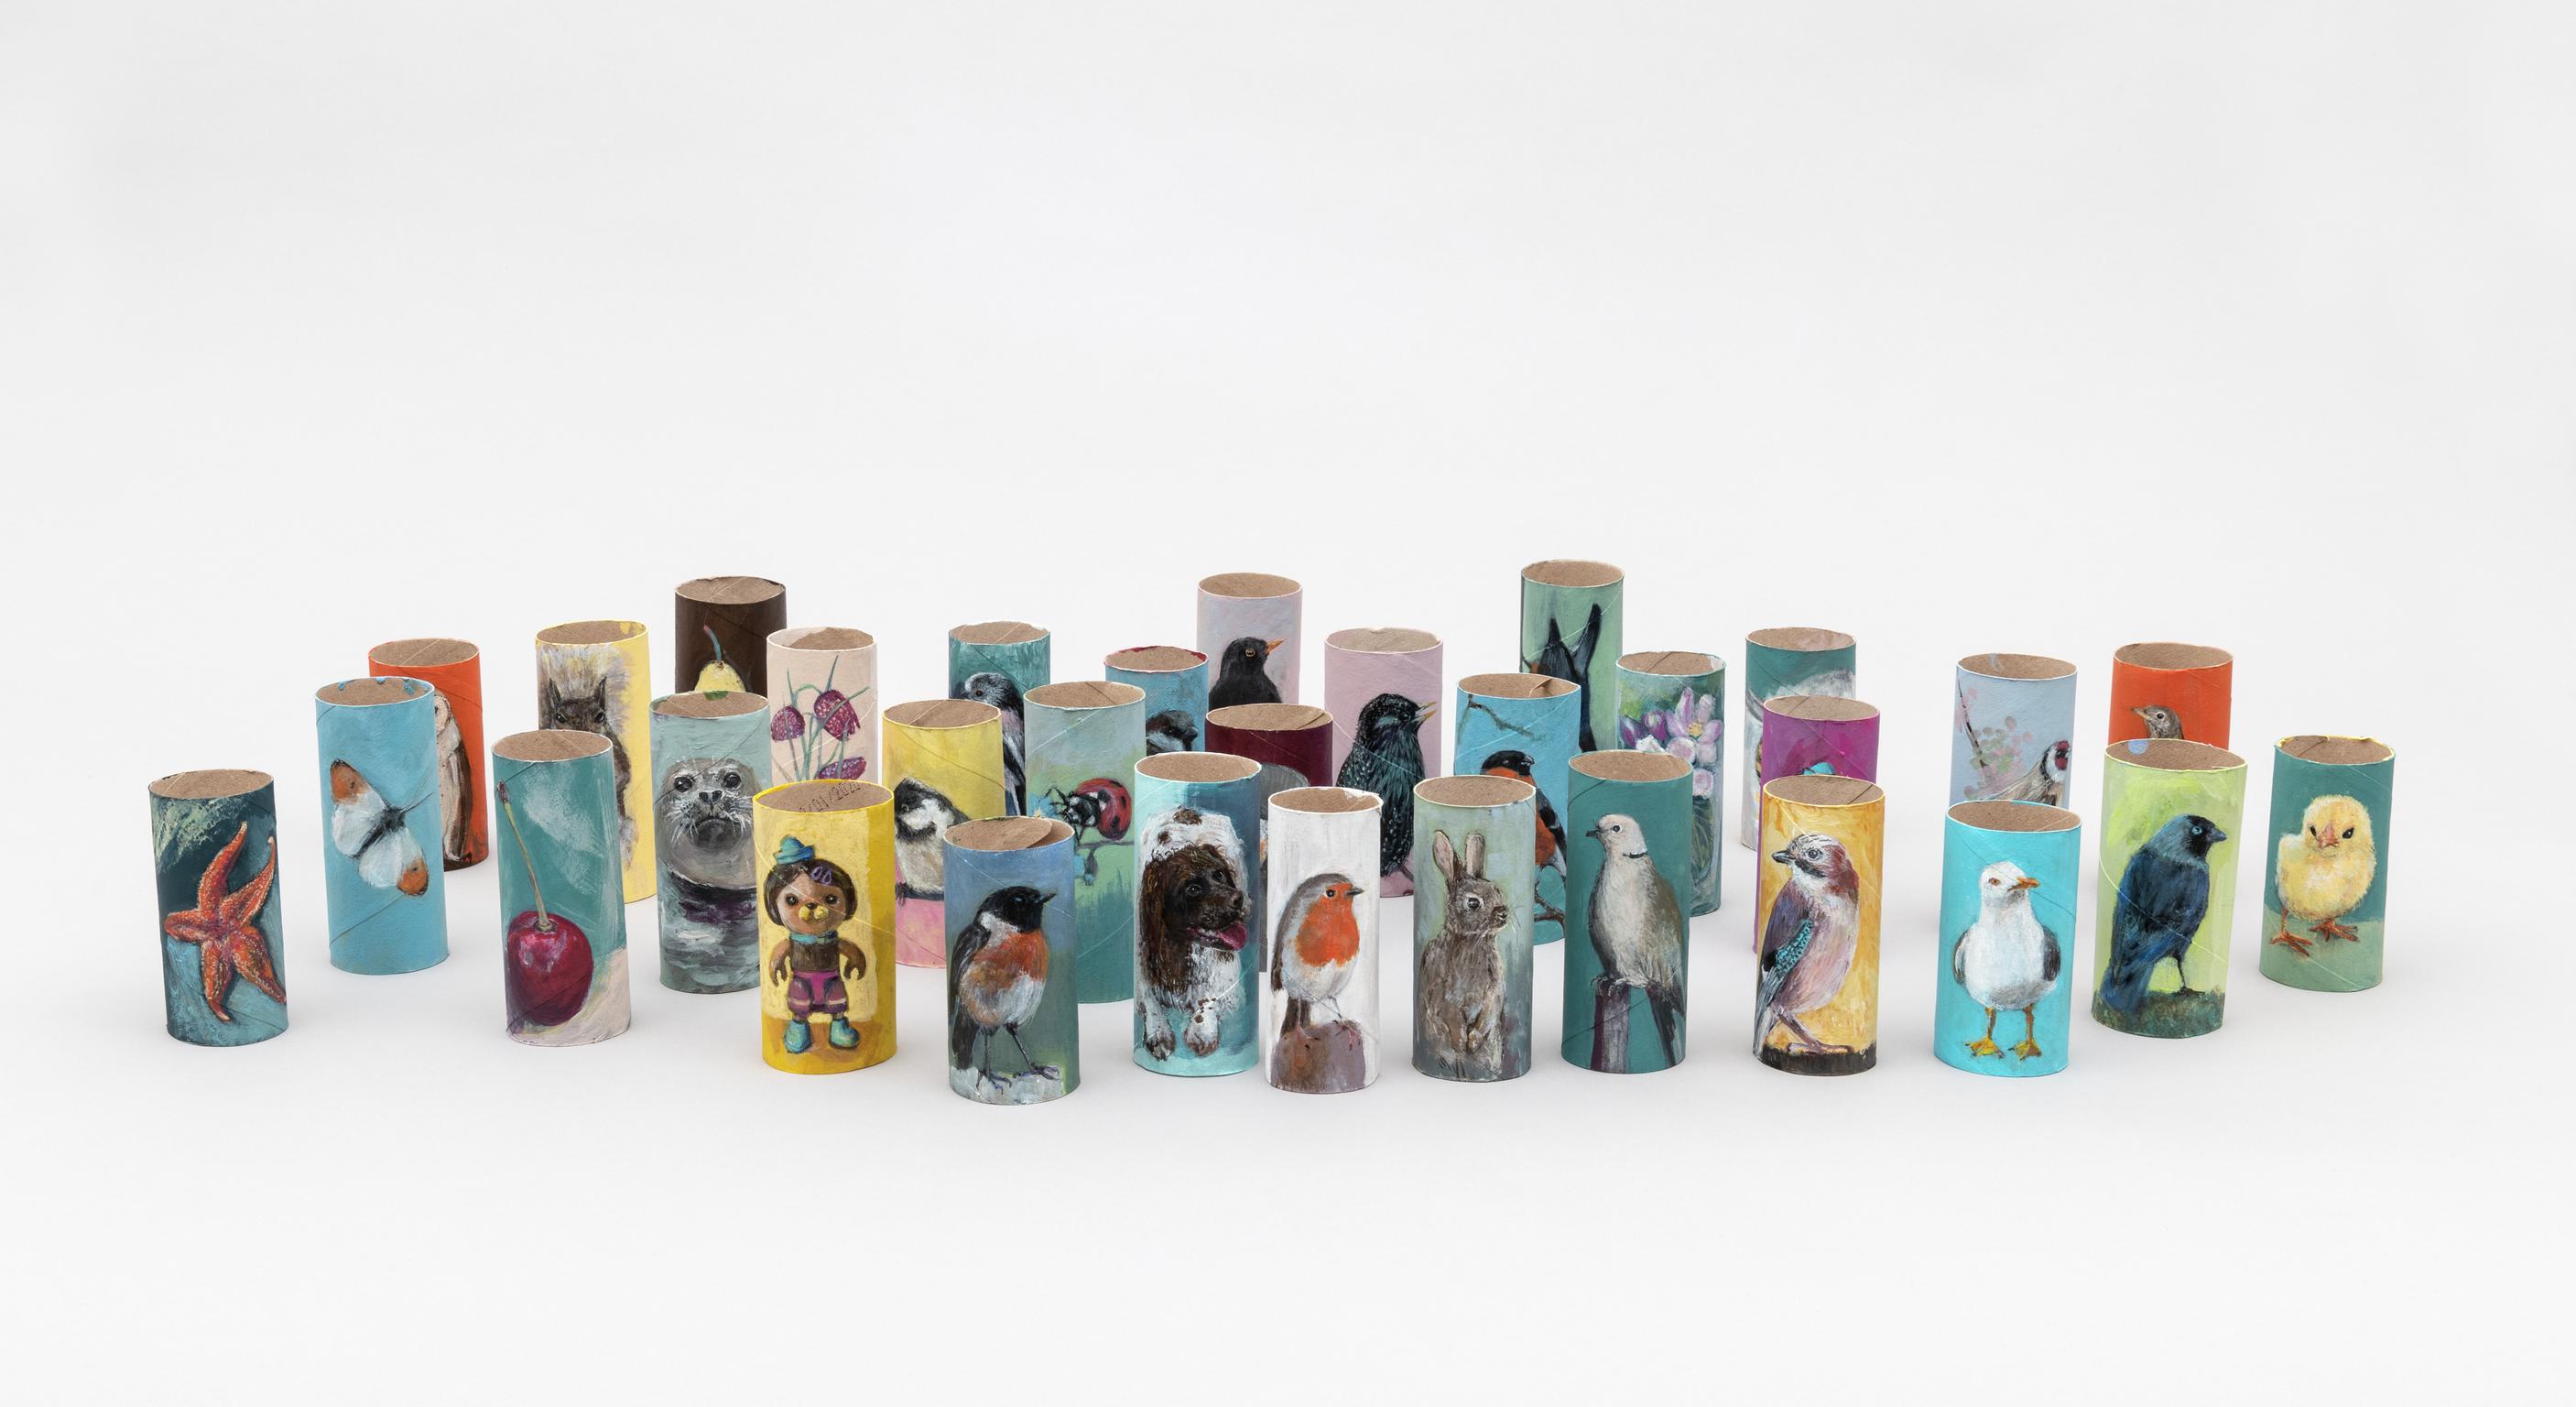 Group shot of Handpainted toilet roll by Carys Evans